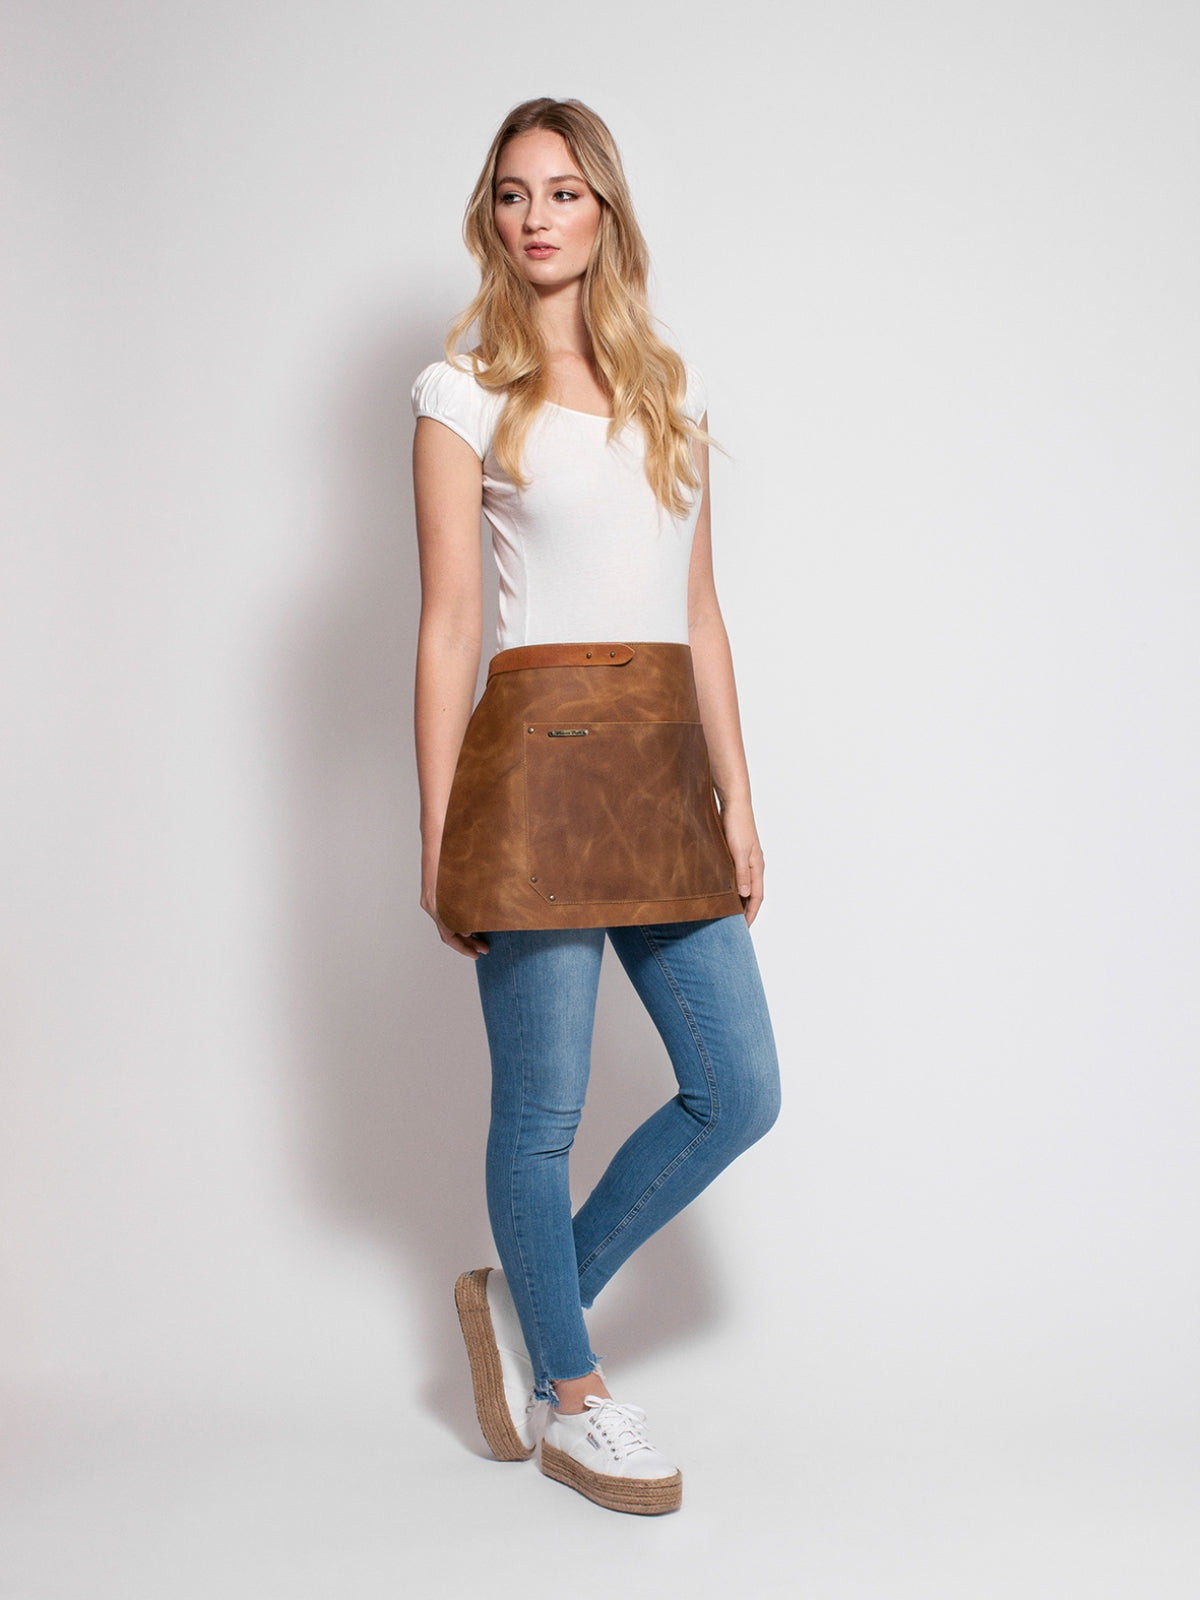 Leather Waist Apron Rustic Whiskey by Stalwart -  ChefsCotton